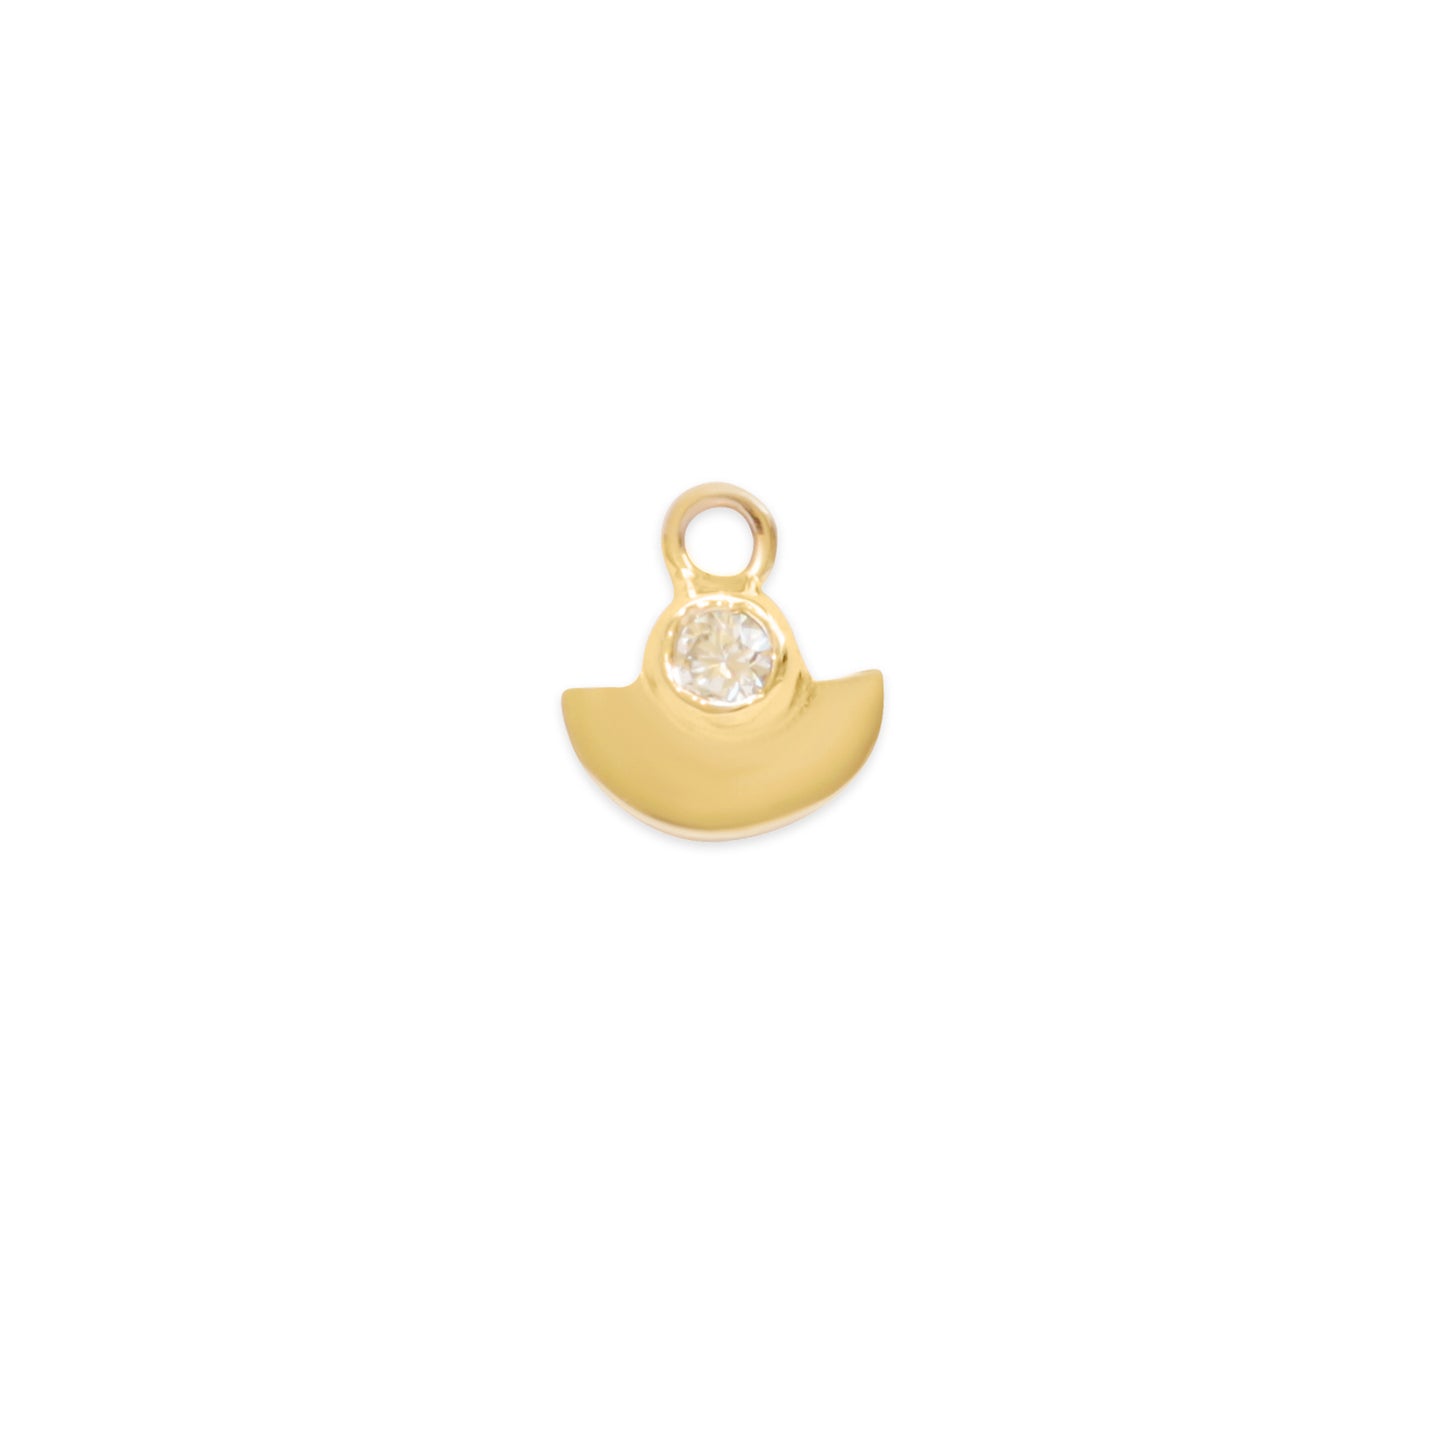 Load image into Gallery viewer, Half Moon Disc Charm / Lab Round Diamond - Goldpoint Studio - Greenpoint, Brooklyn - Fine Jewelry
